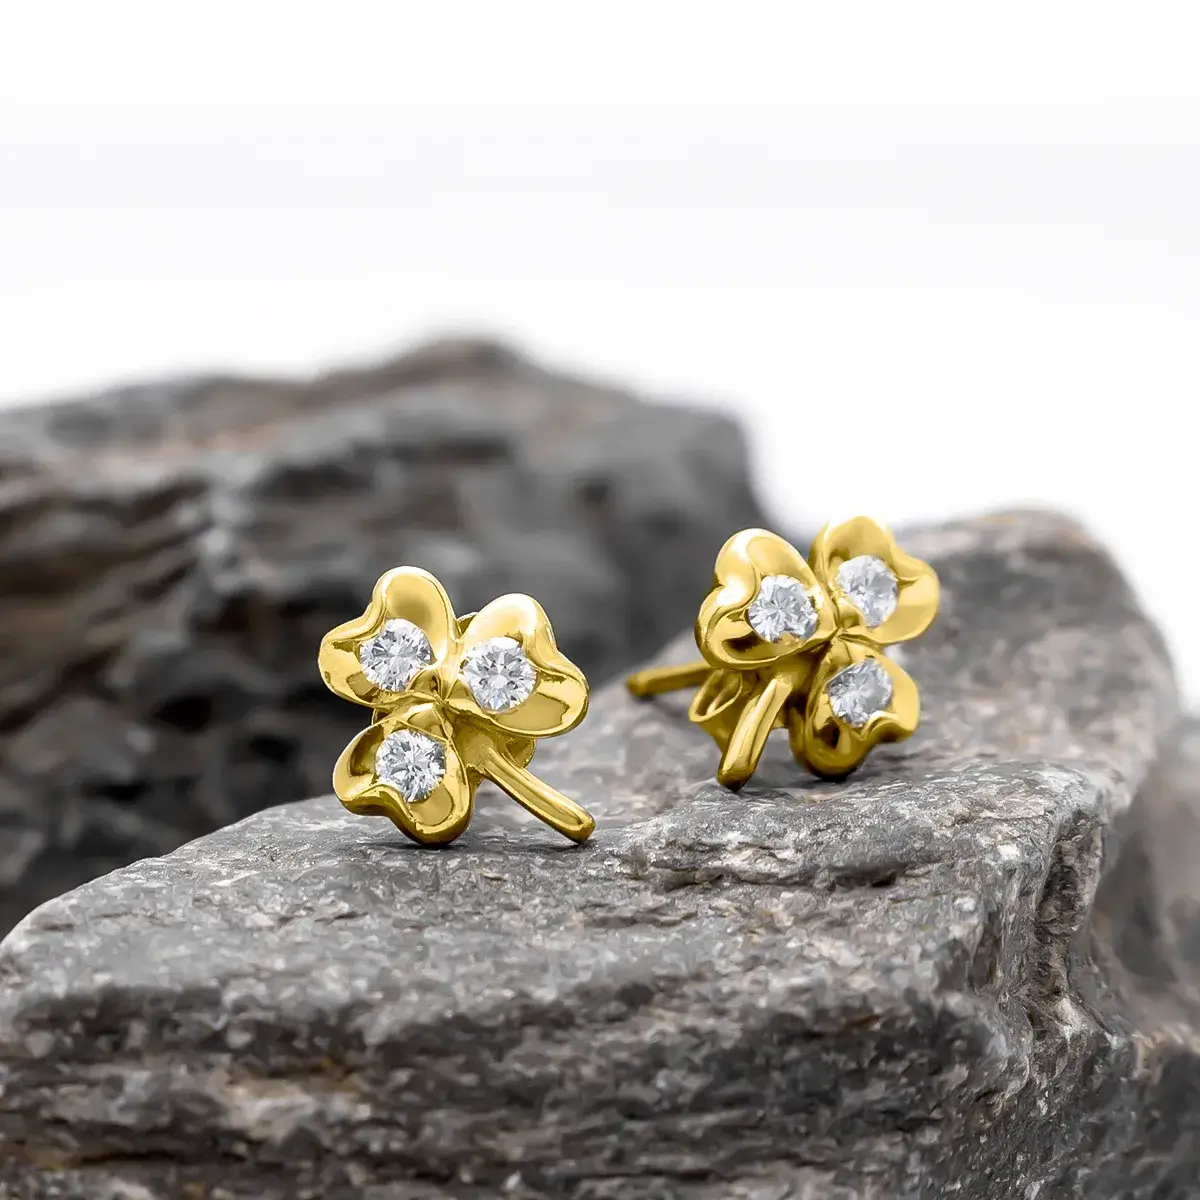 flower diamond earrings suitable for all ages -available in yellow